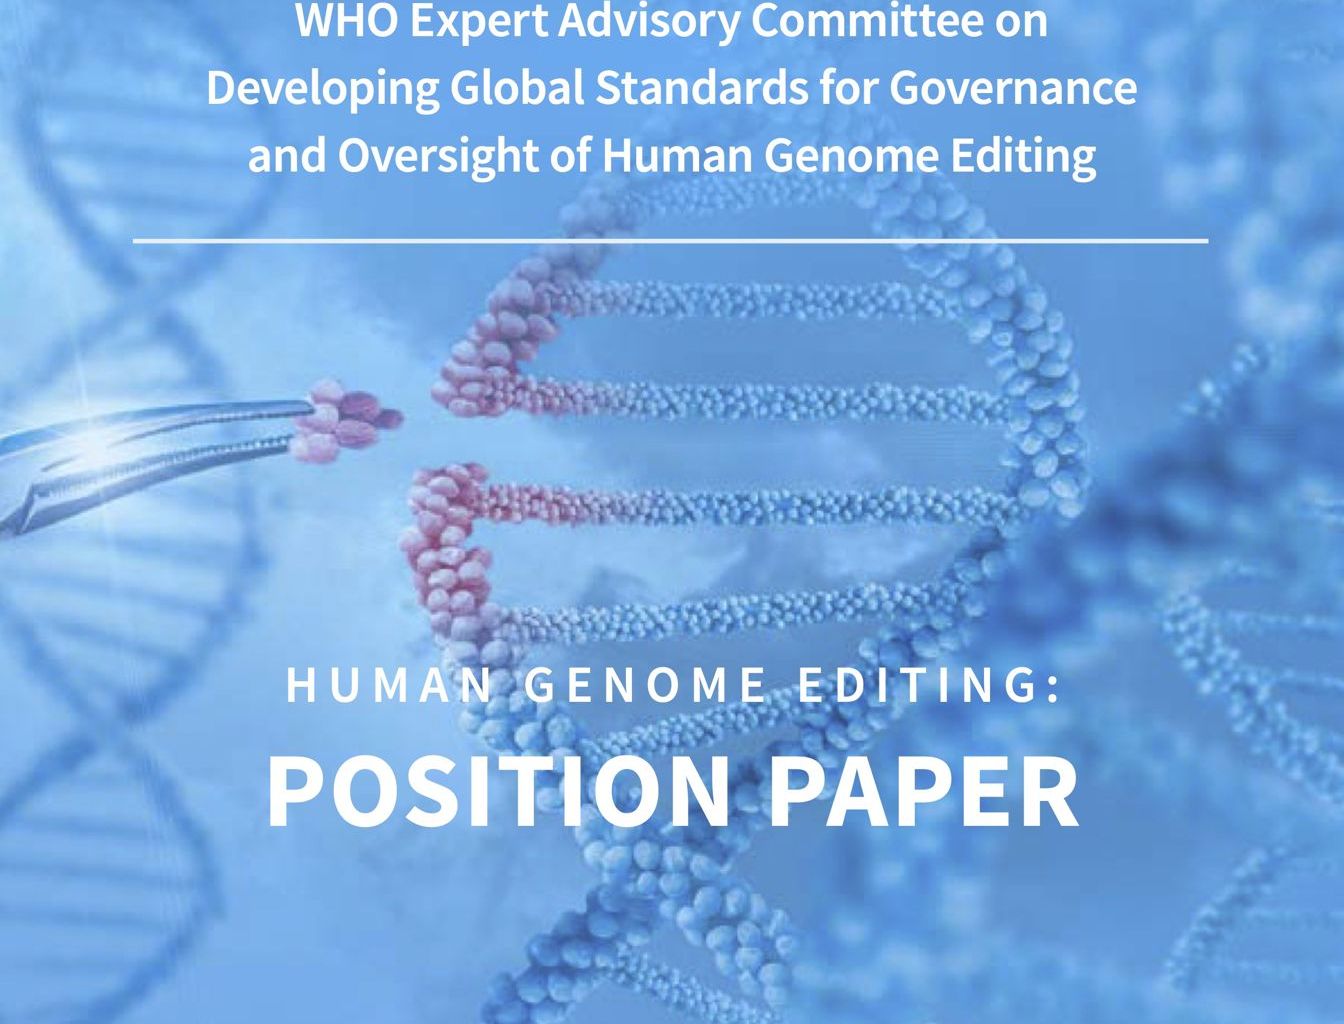 Human genome editing: position paper